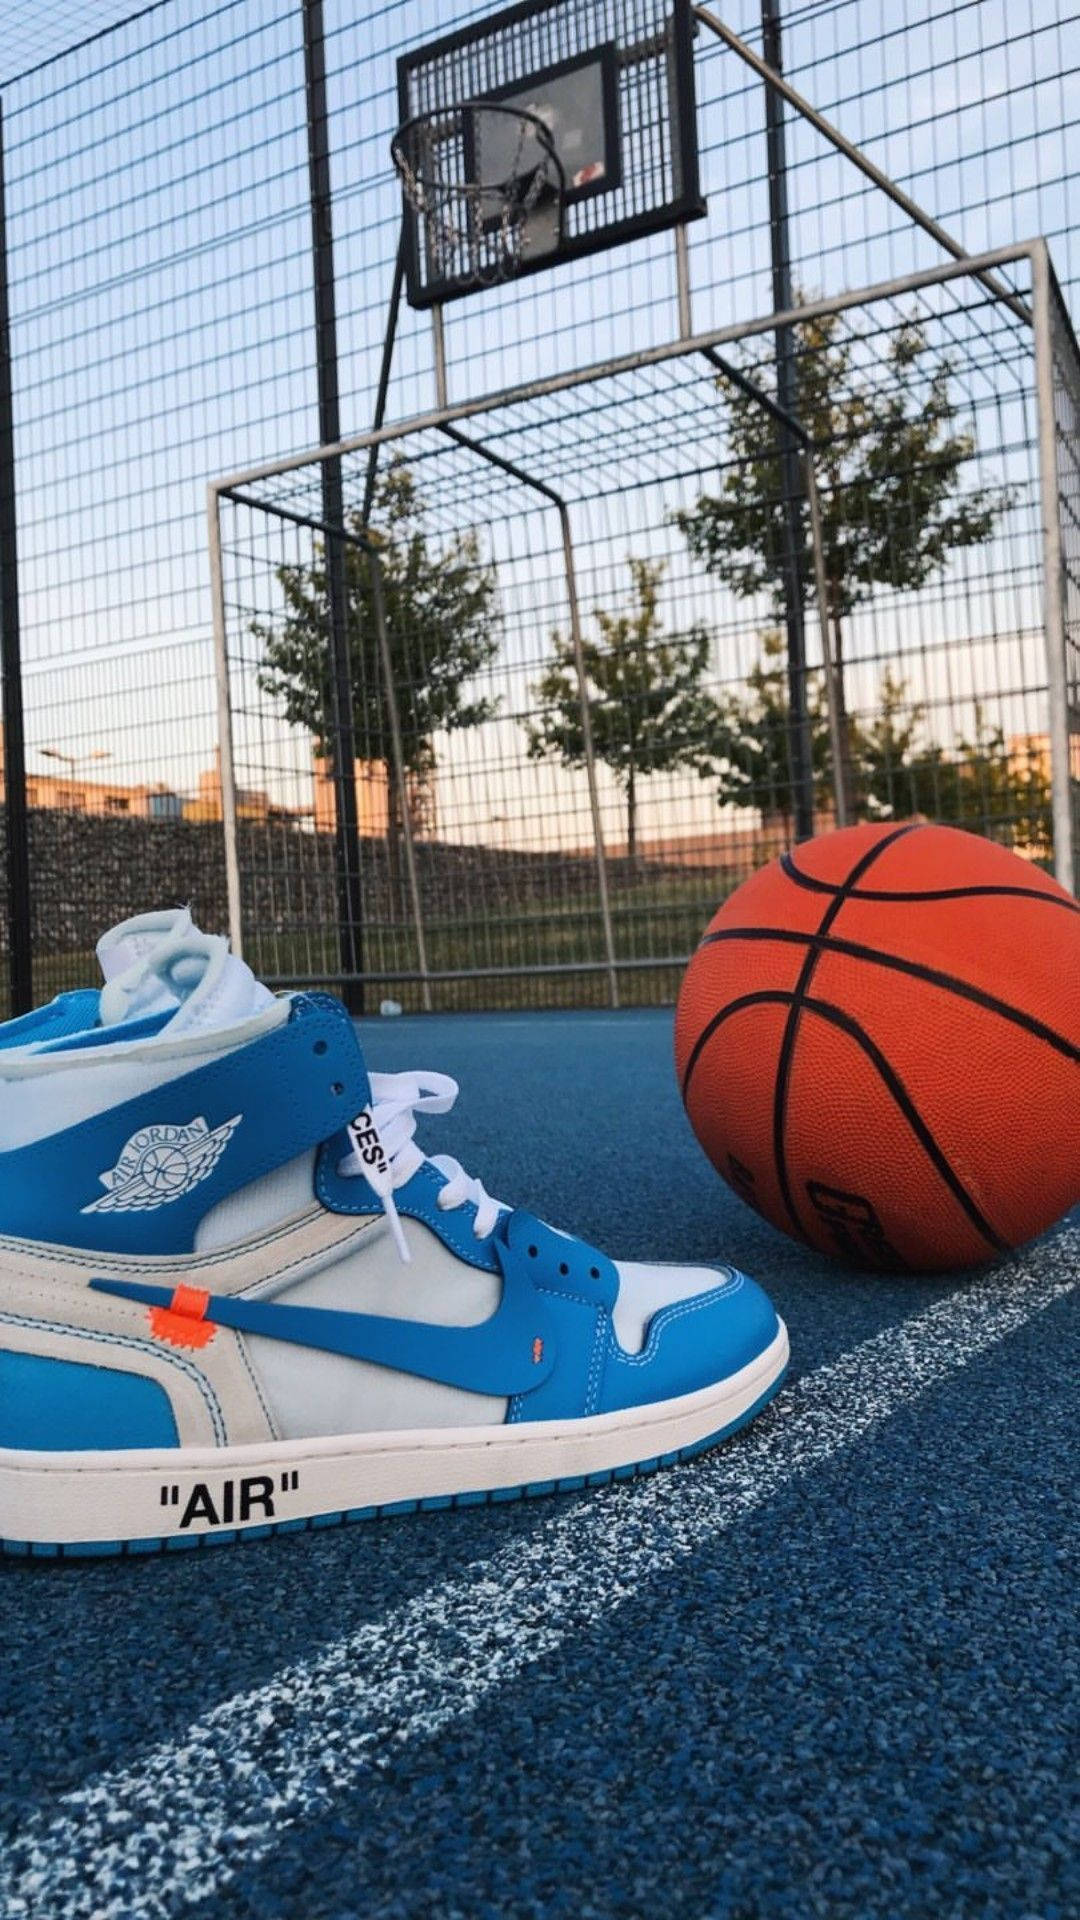 Basketball Iphone Blue Shoe And Ball Wallpaper